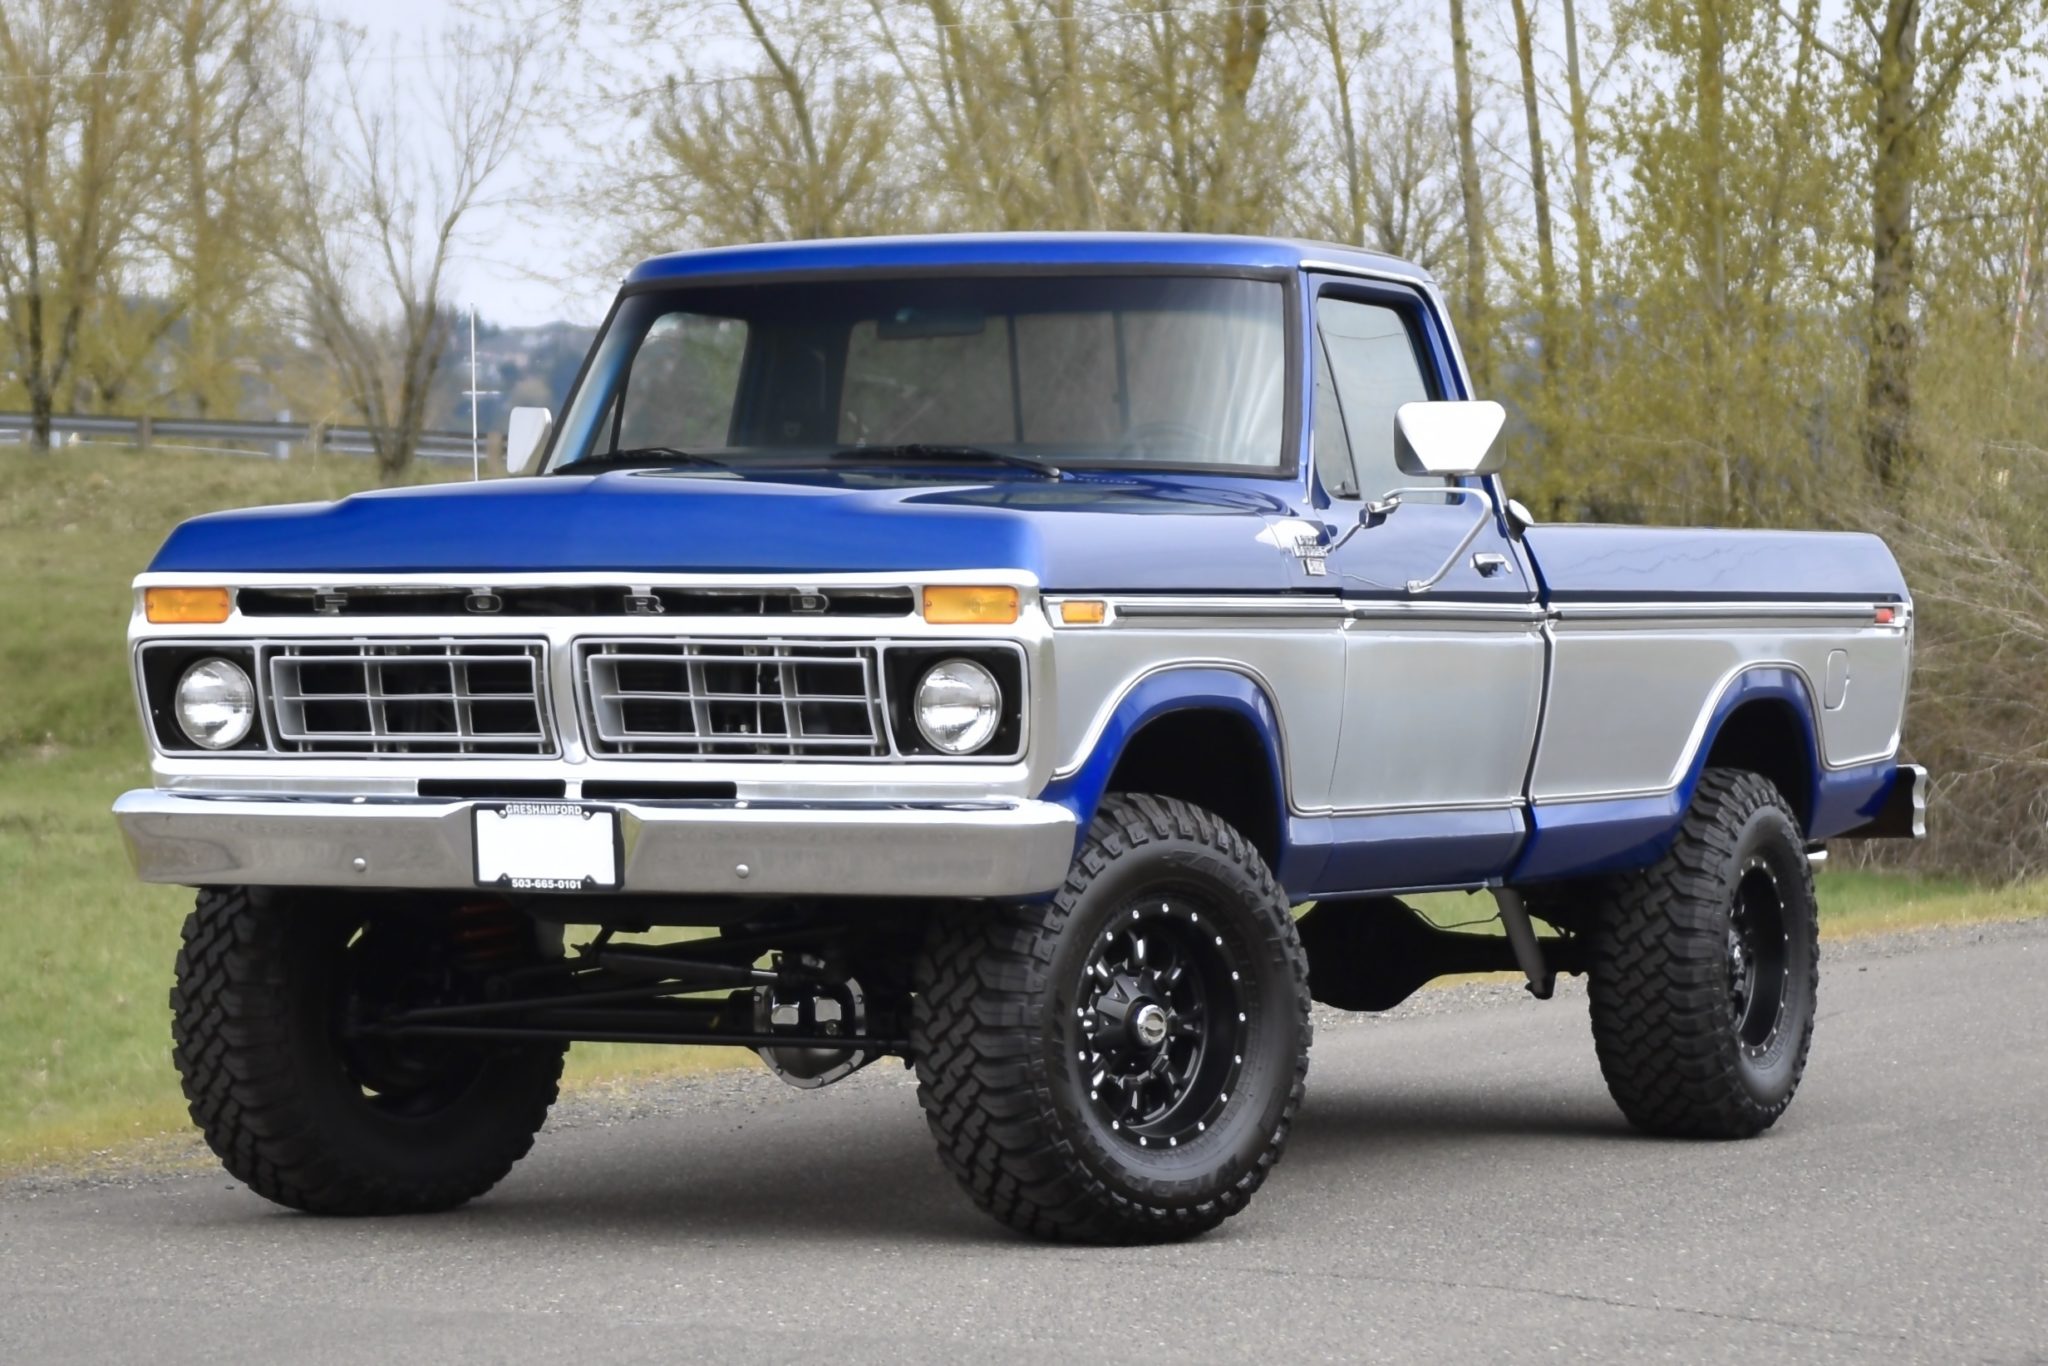 This 1977 Ford F-150 Ranger XLT Packs a Four-Barrel Carbureted 351